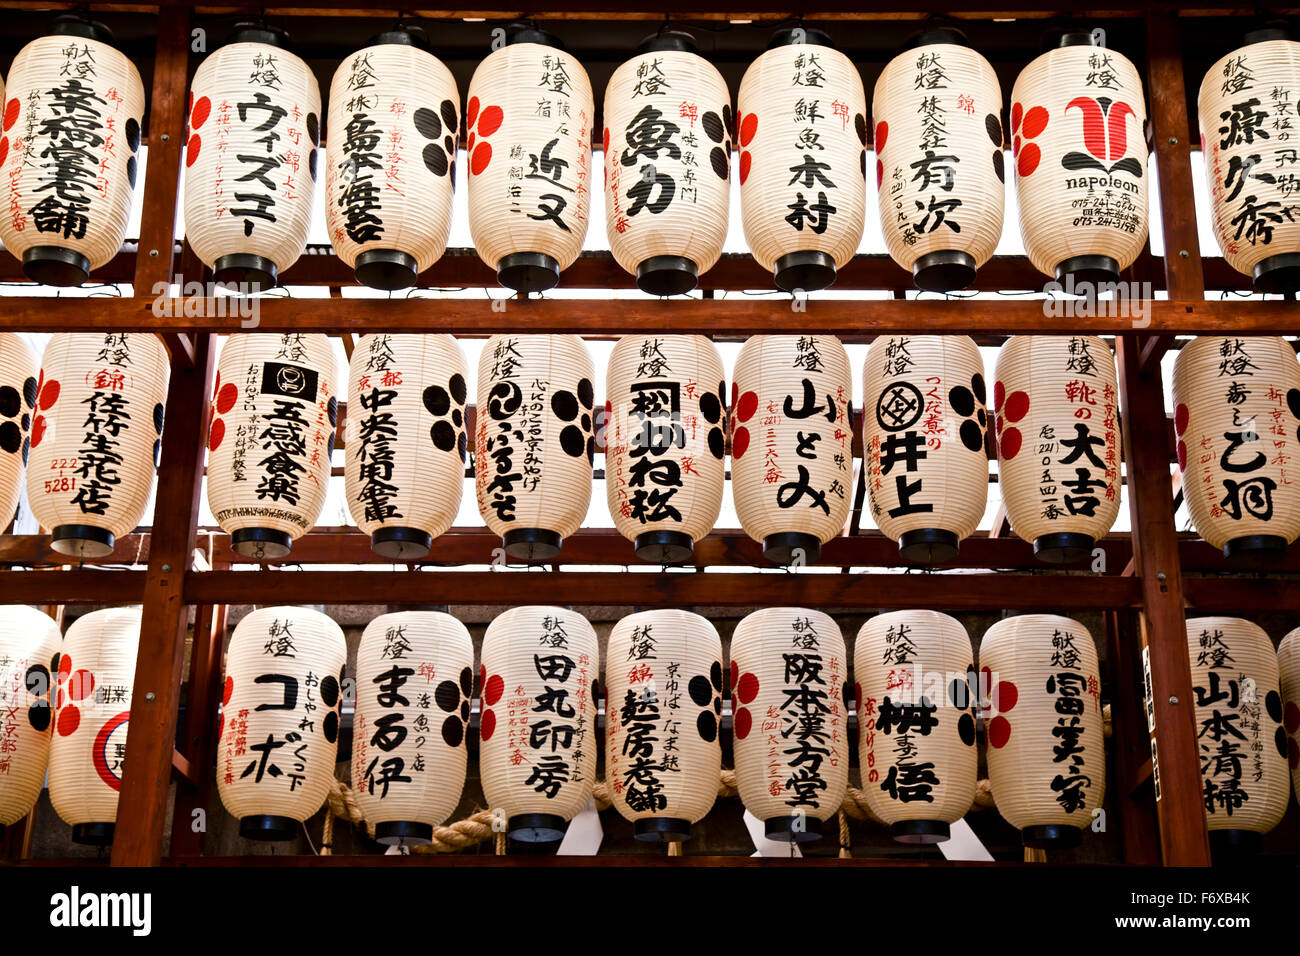 Paper lanterns hanging in a row with Japanese script; Kyoto, Japan Stock Photo